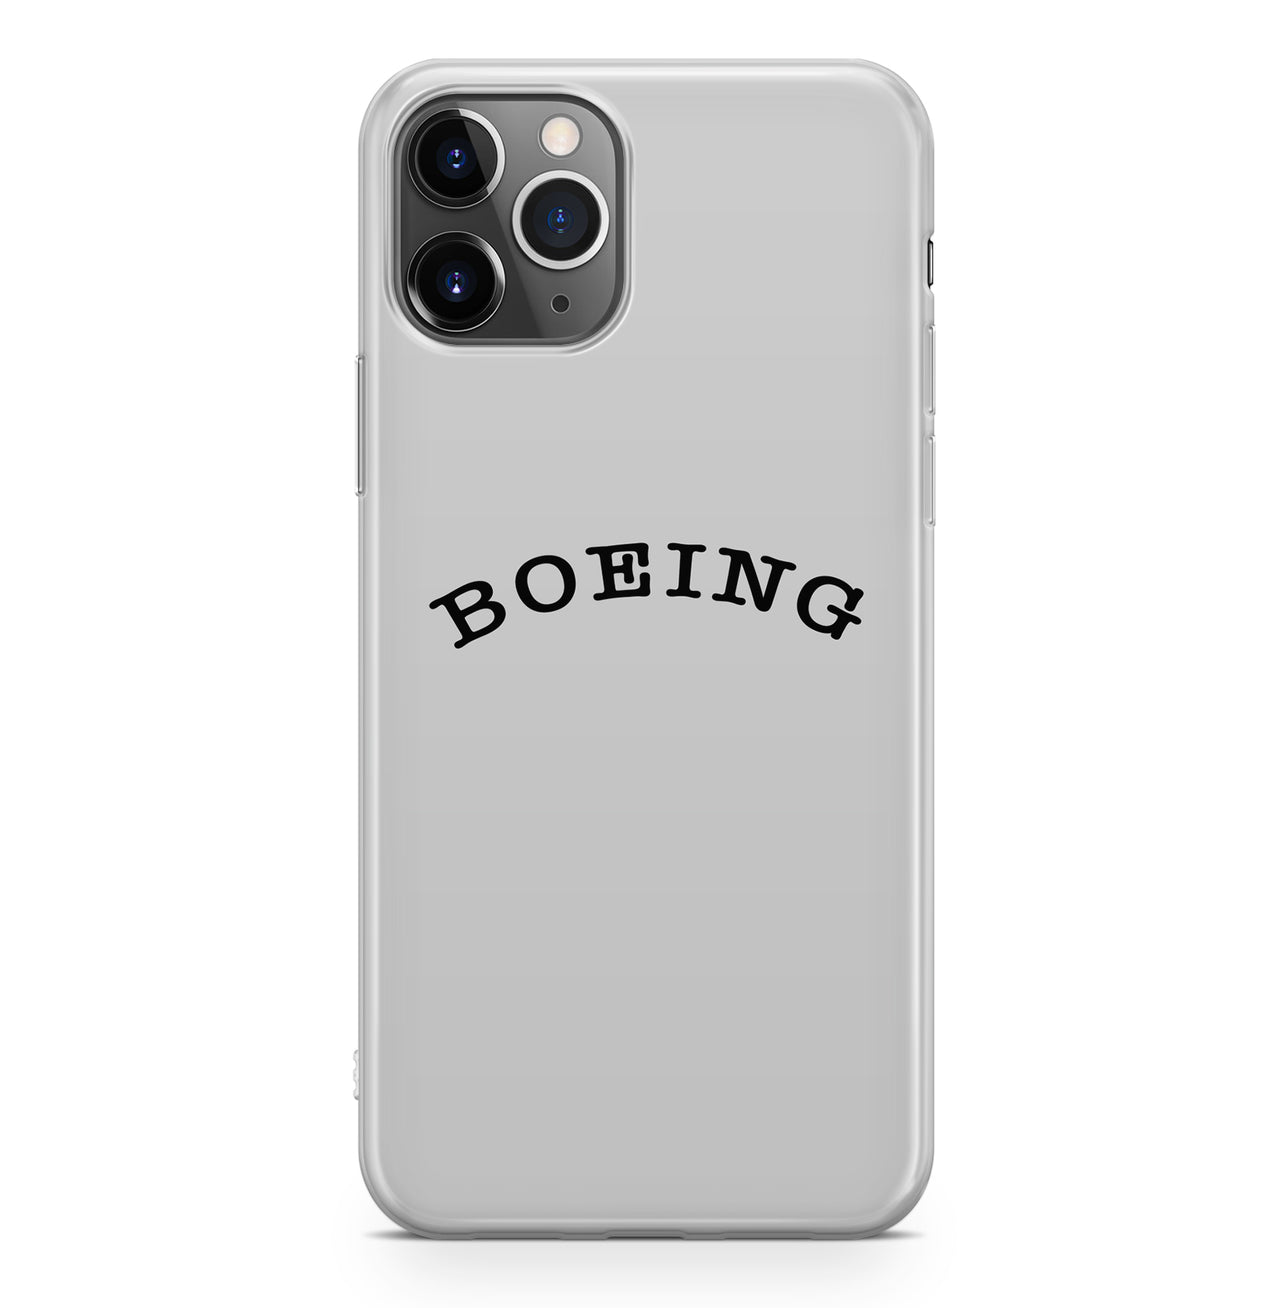 Special BOEING Text Designed iPhone Cases